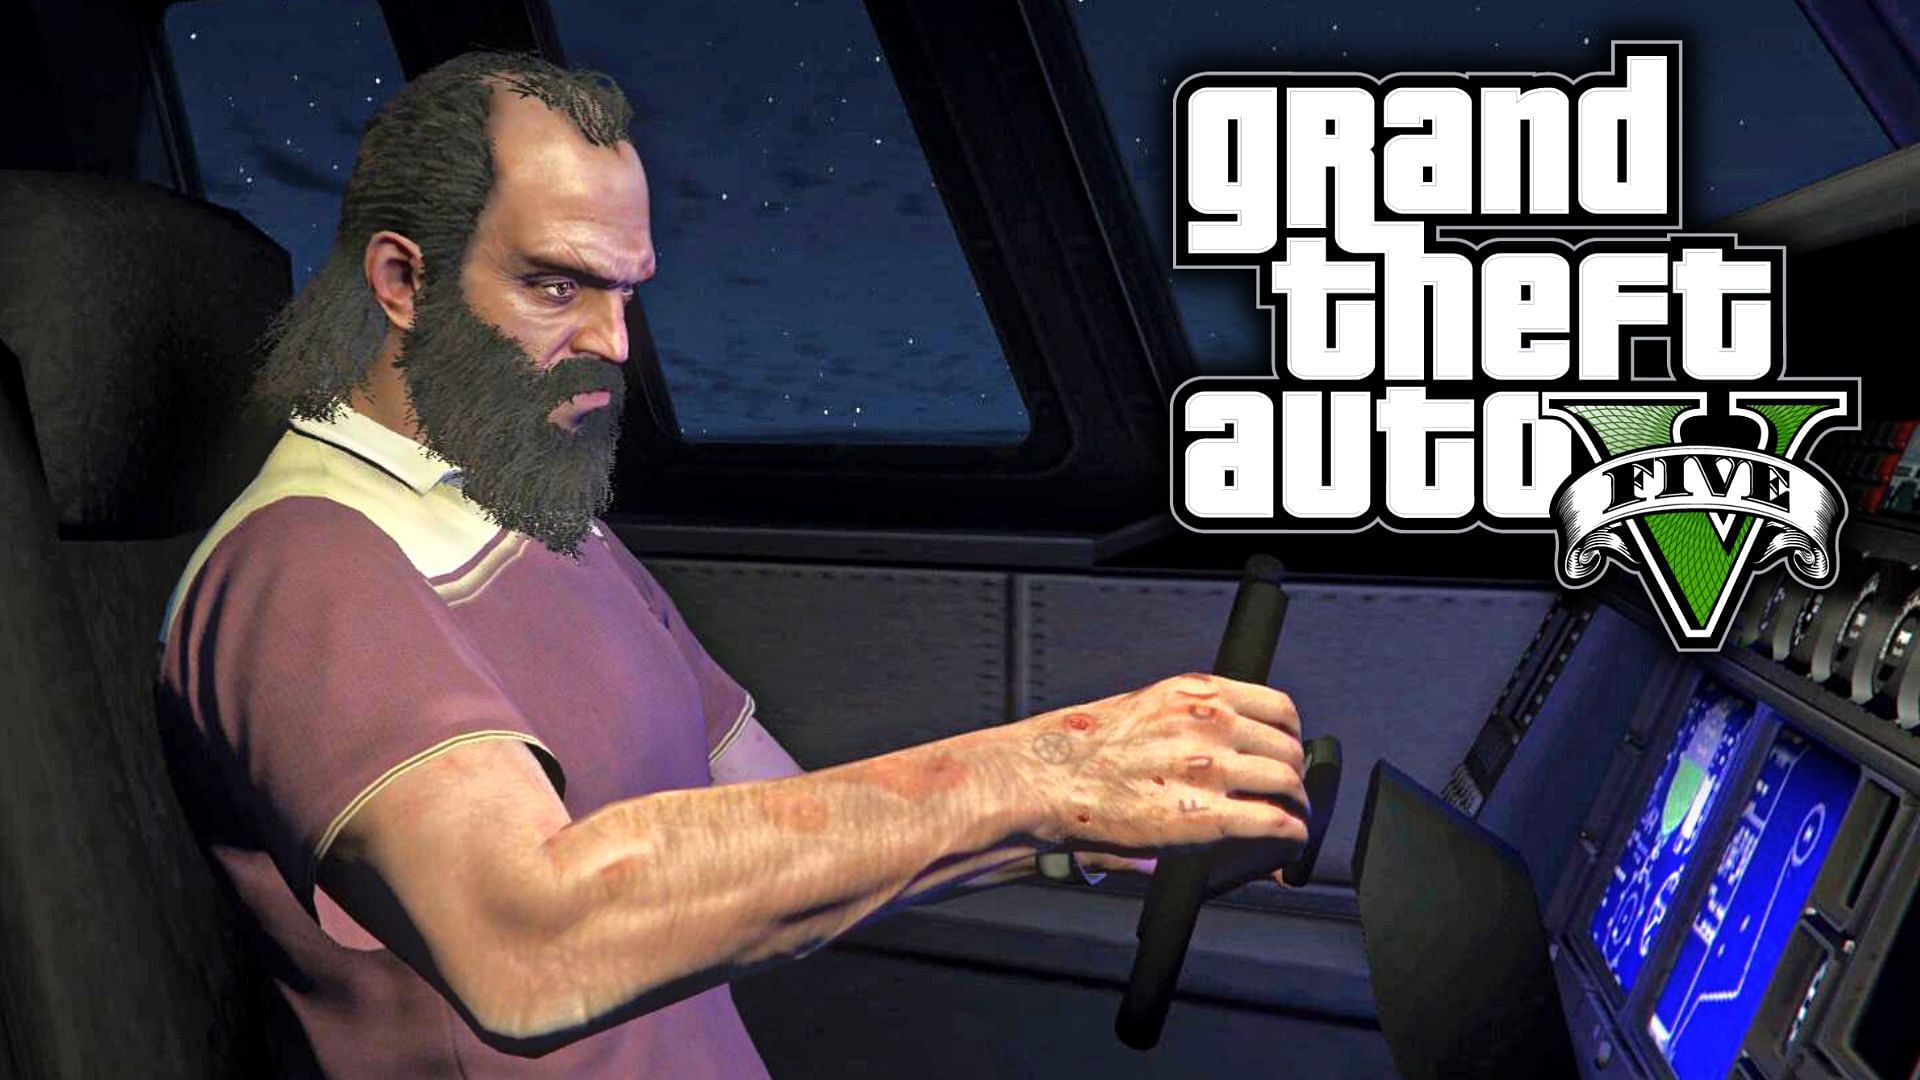 A brief about Minor Turbulence mission of GTA 5 (Image via Rockstar Games)